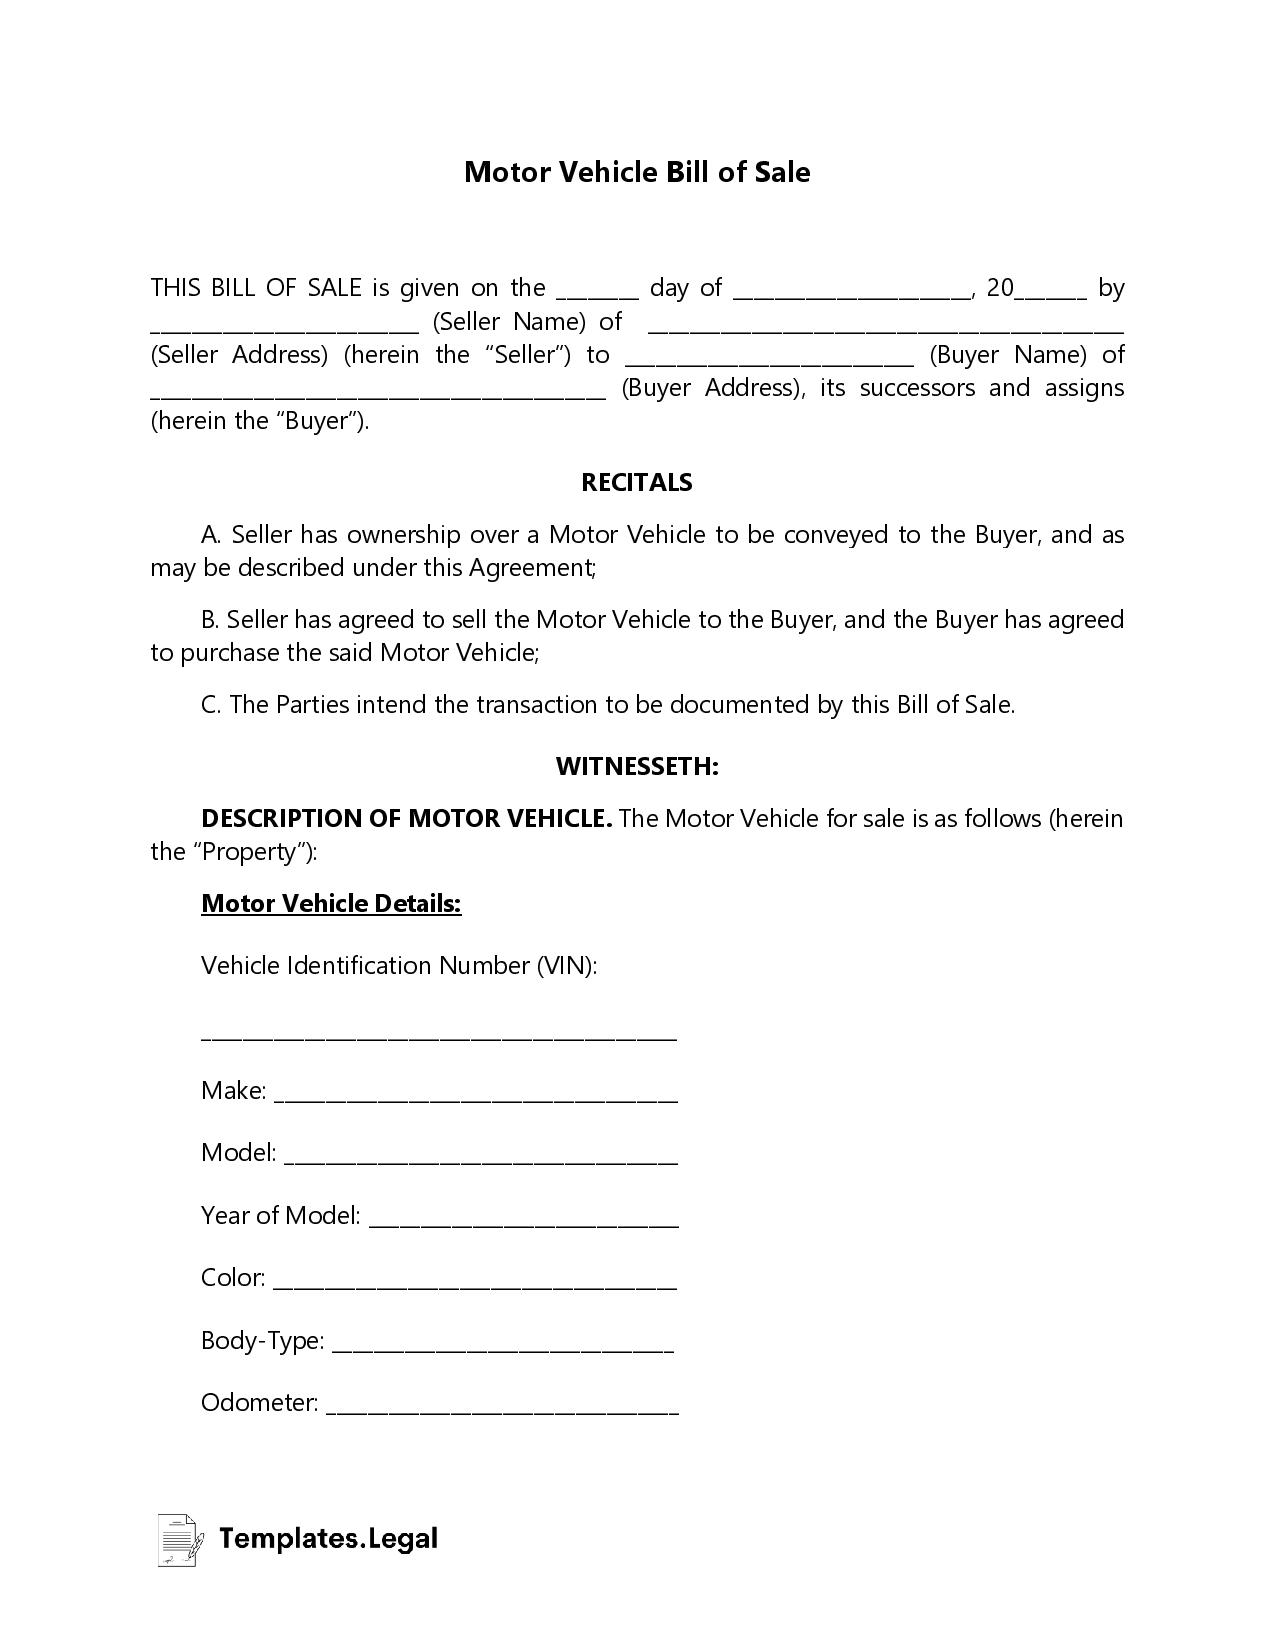 Motor Vehicle Bill of Sale - Templates.Legal